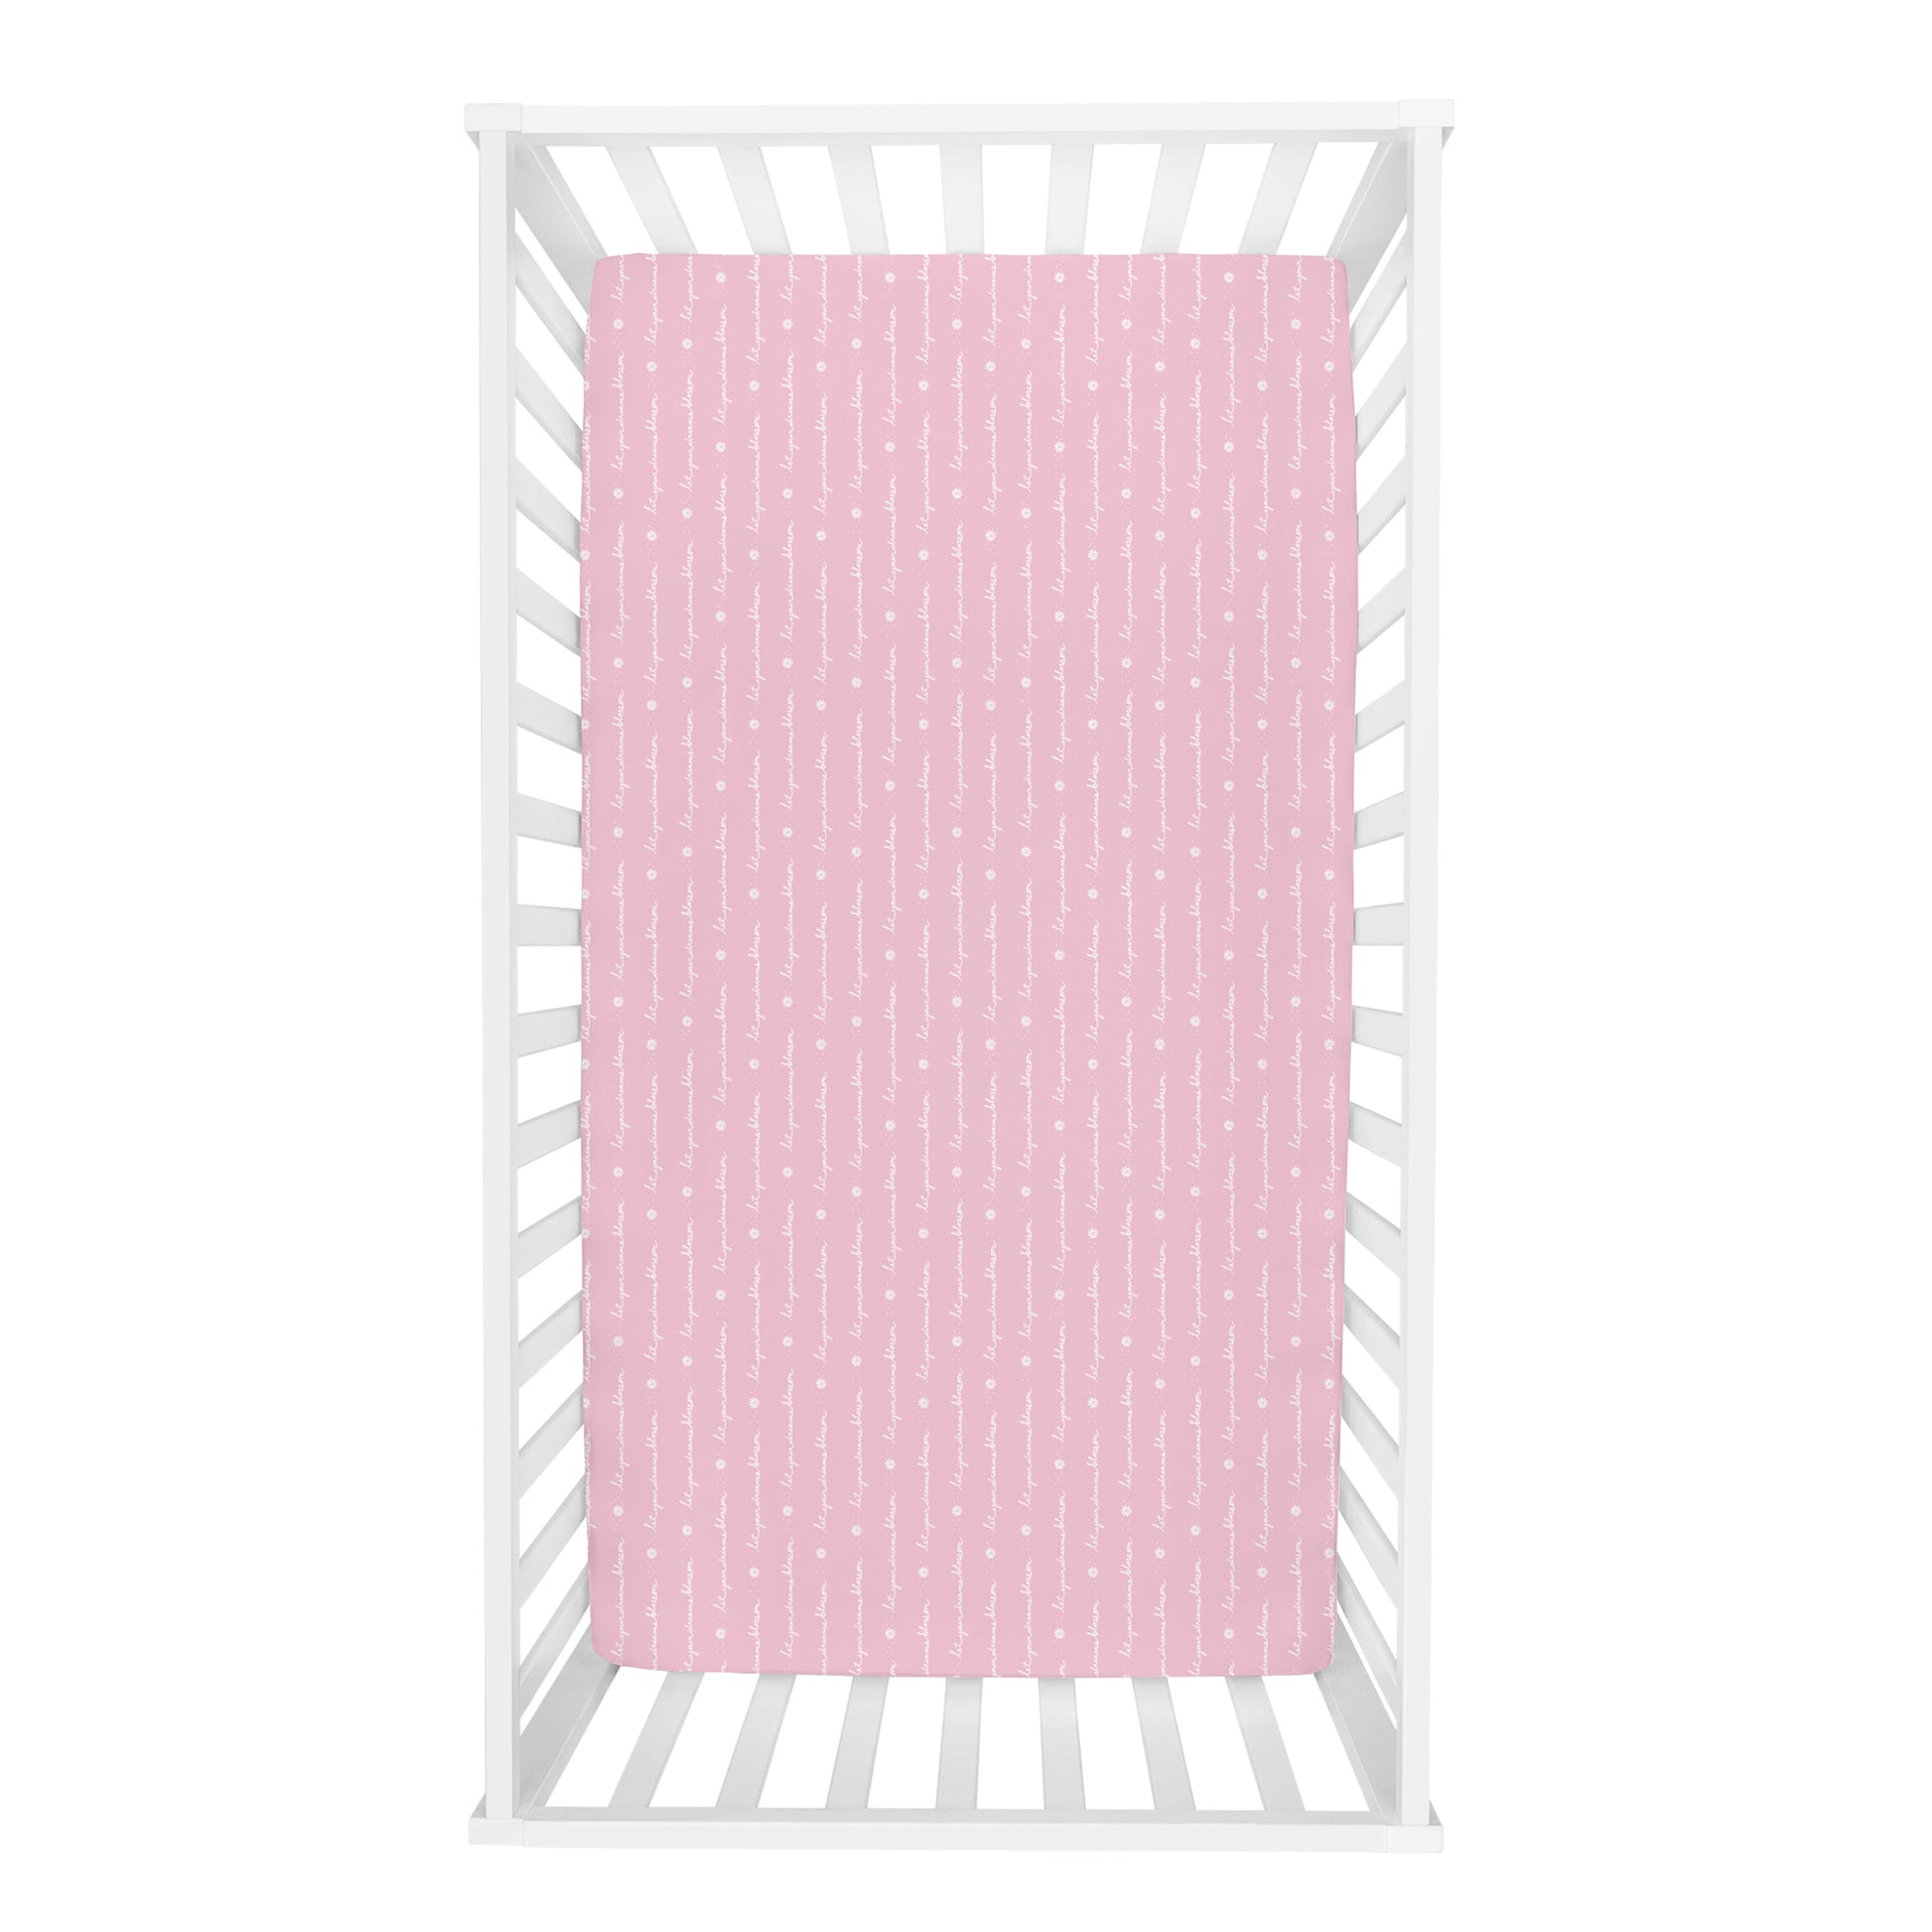 Floral 2-Pack Microfiber Fitted Crib Sheet by Sammy & Lou®; overhead view features “let your dreams blossom” script print in white on a light pink background.